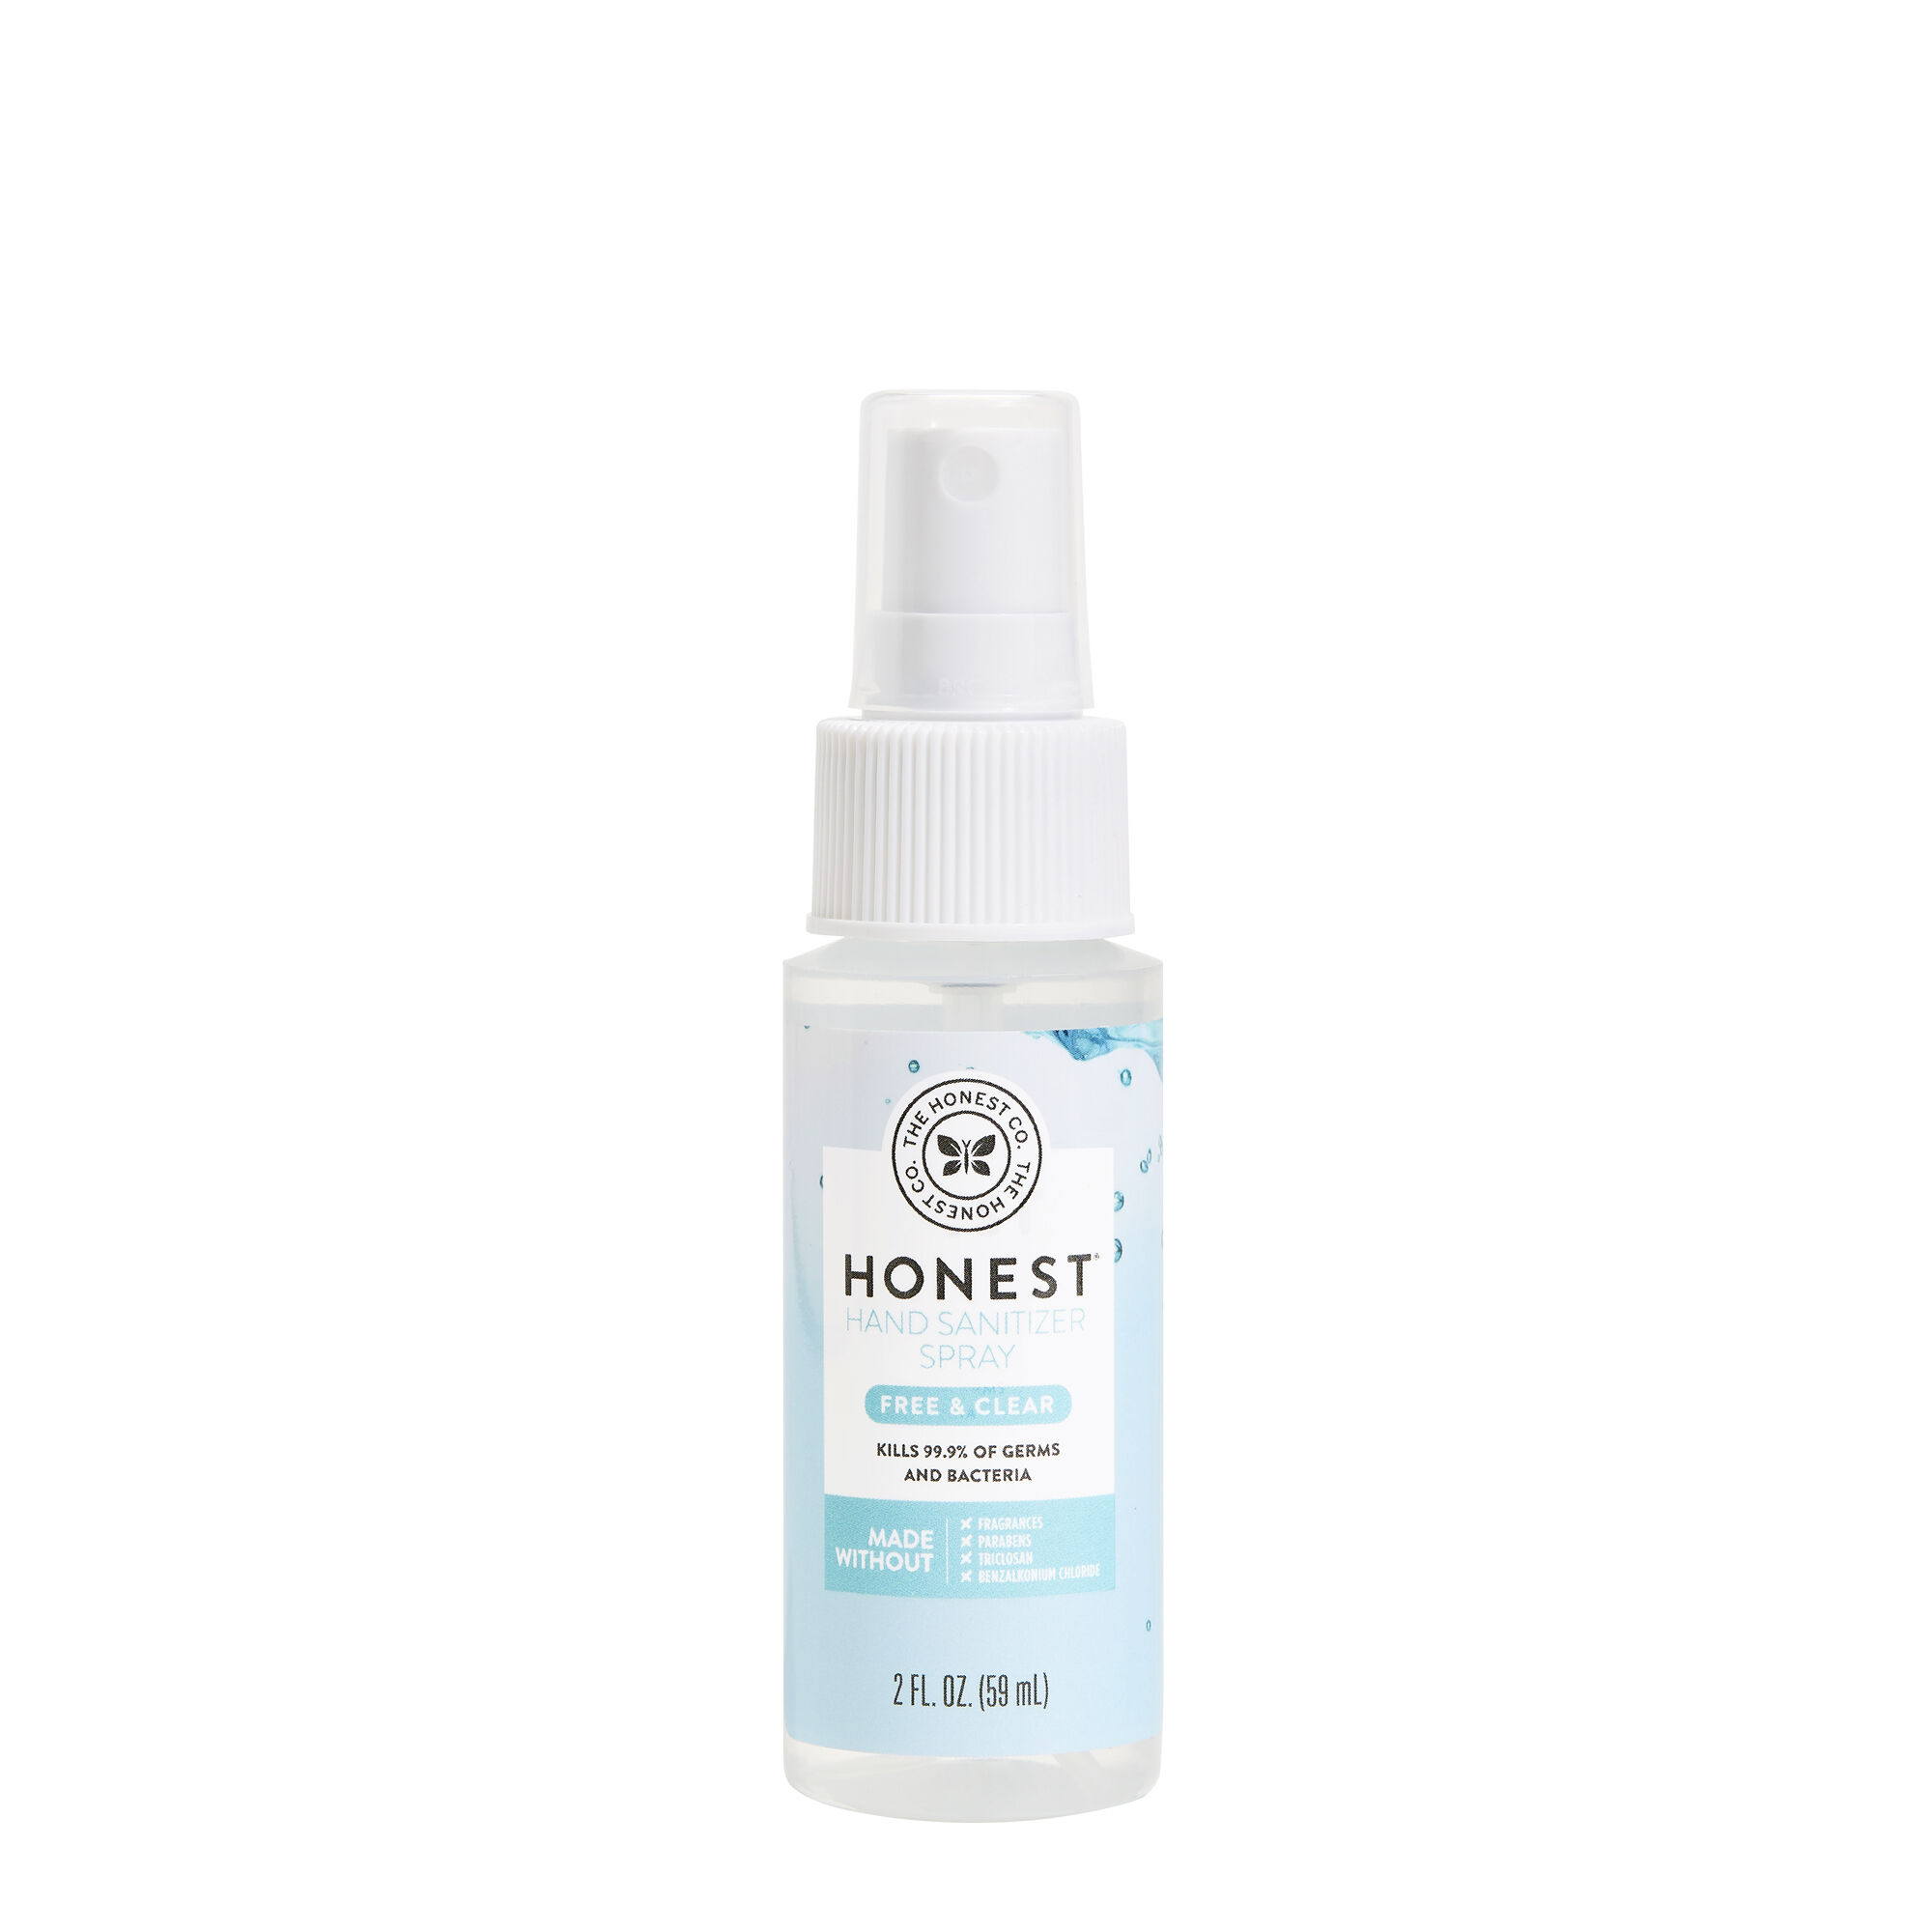 Honest Hand Sanitizer Spray, Free and Clear